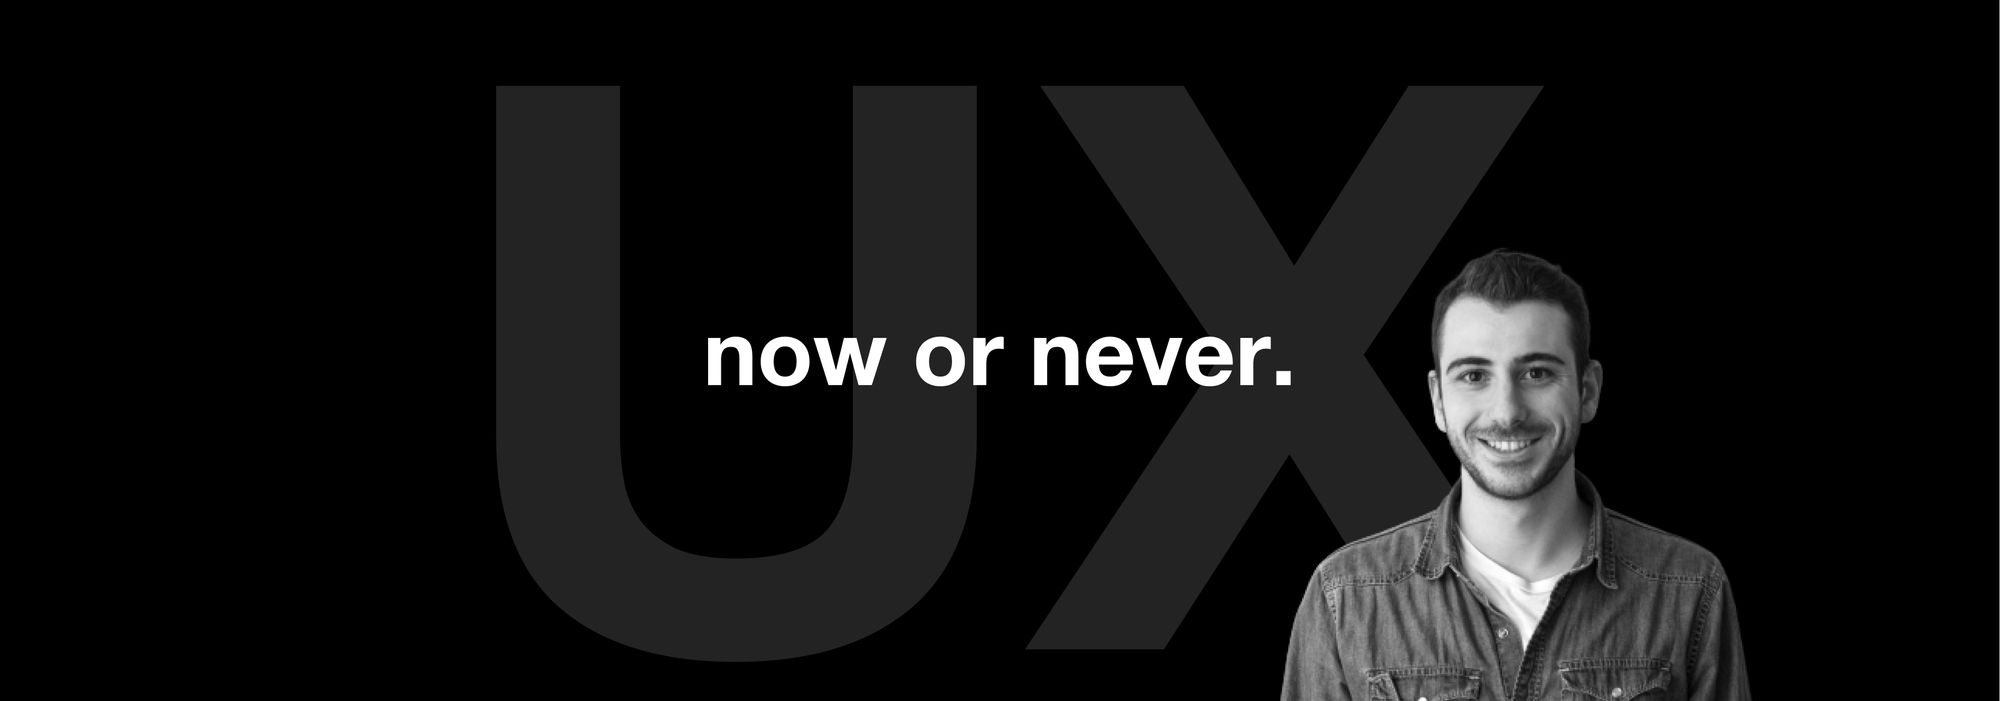 Webinar: UX now or never. An introduction to UX by a UX designer Albert Fourage